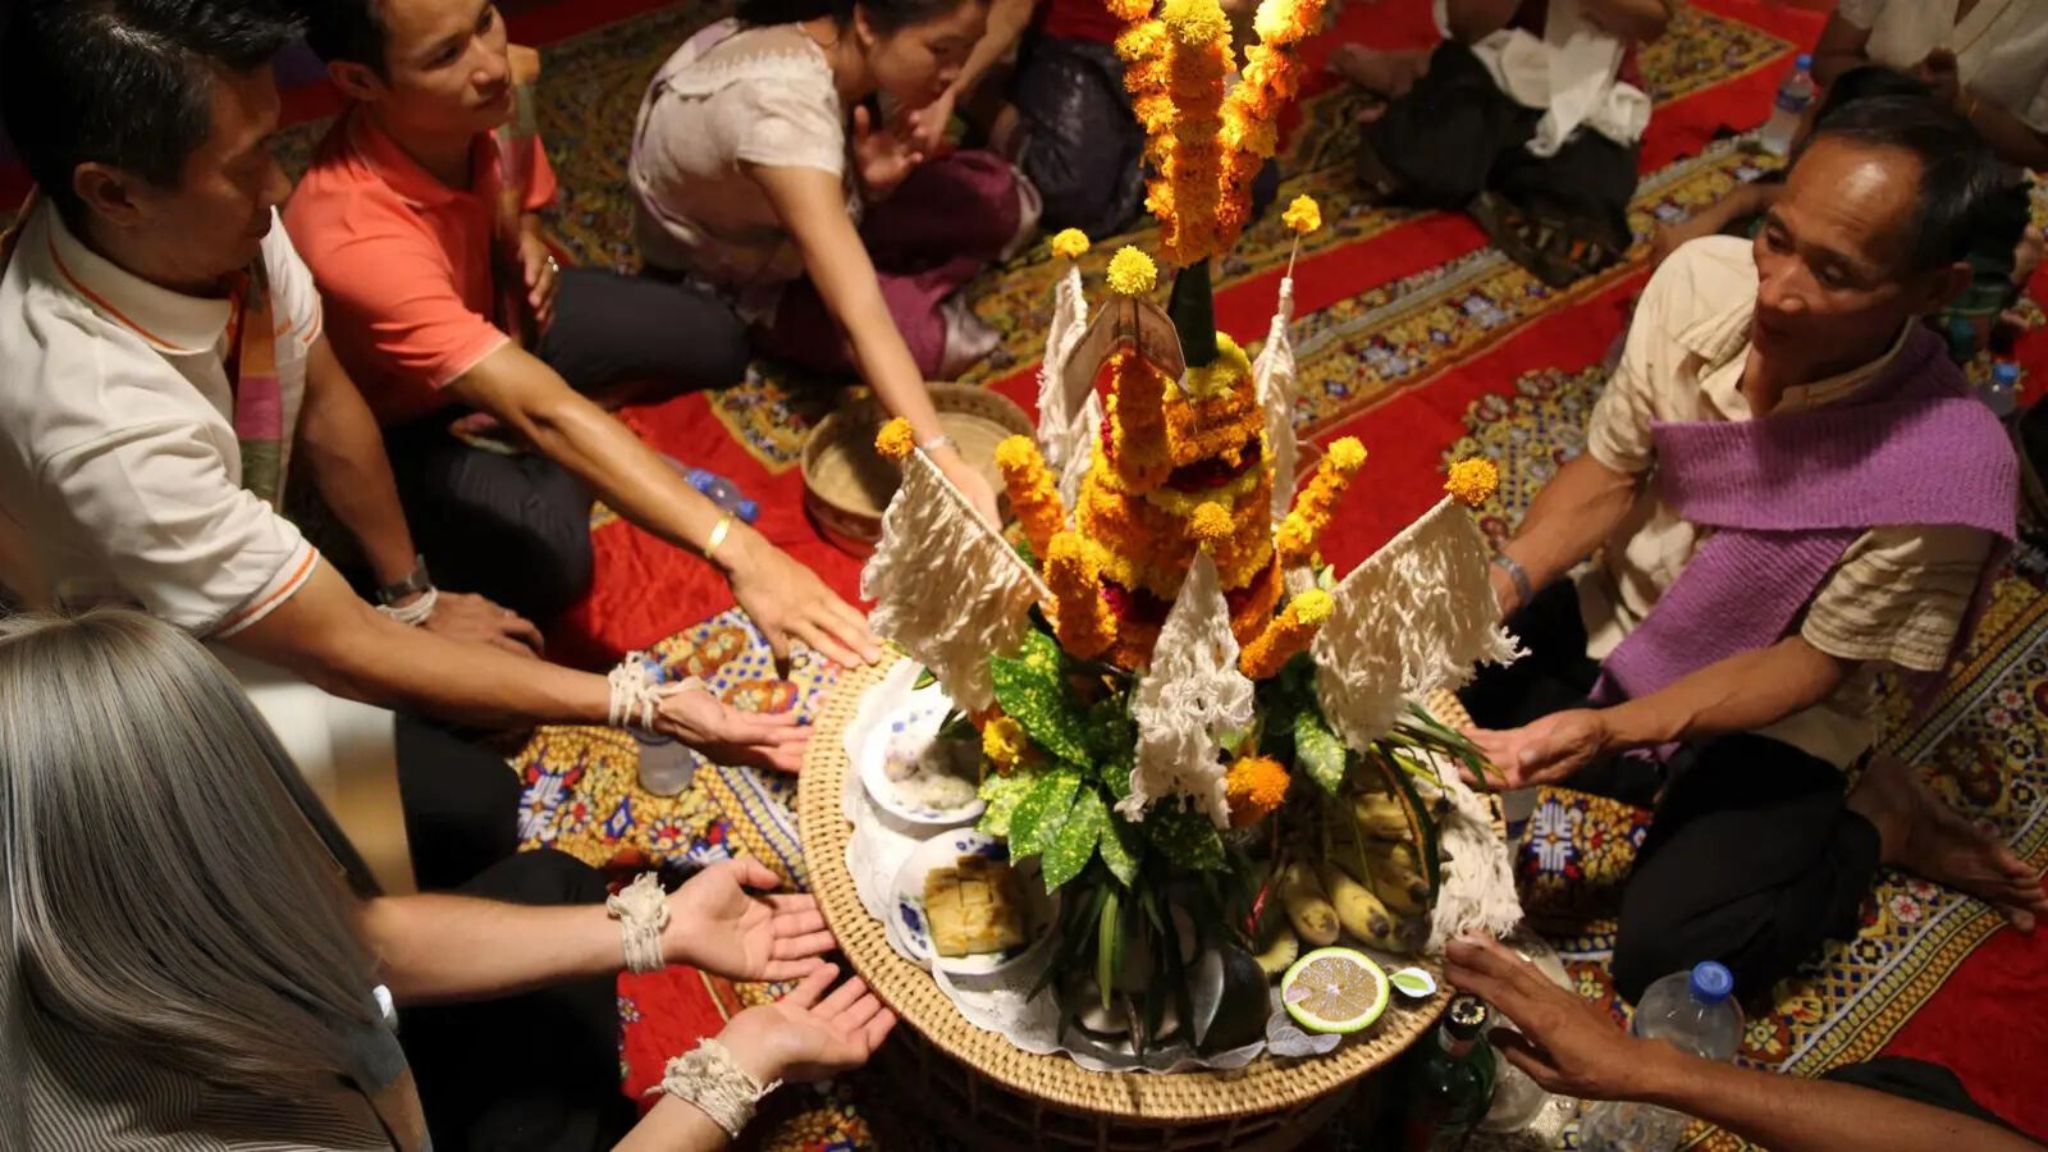 Day 5 Experience A Traditional Festive Moment In The Laotian Community